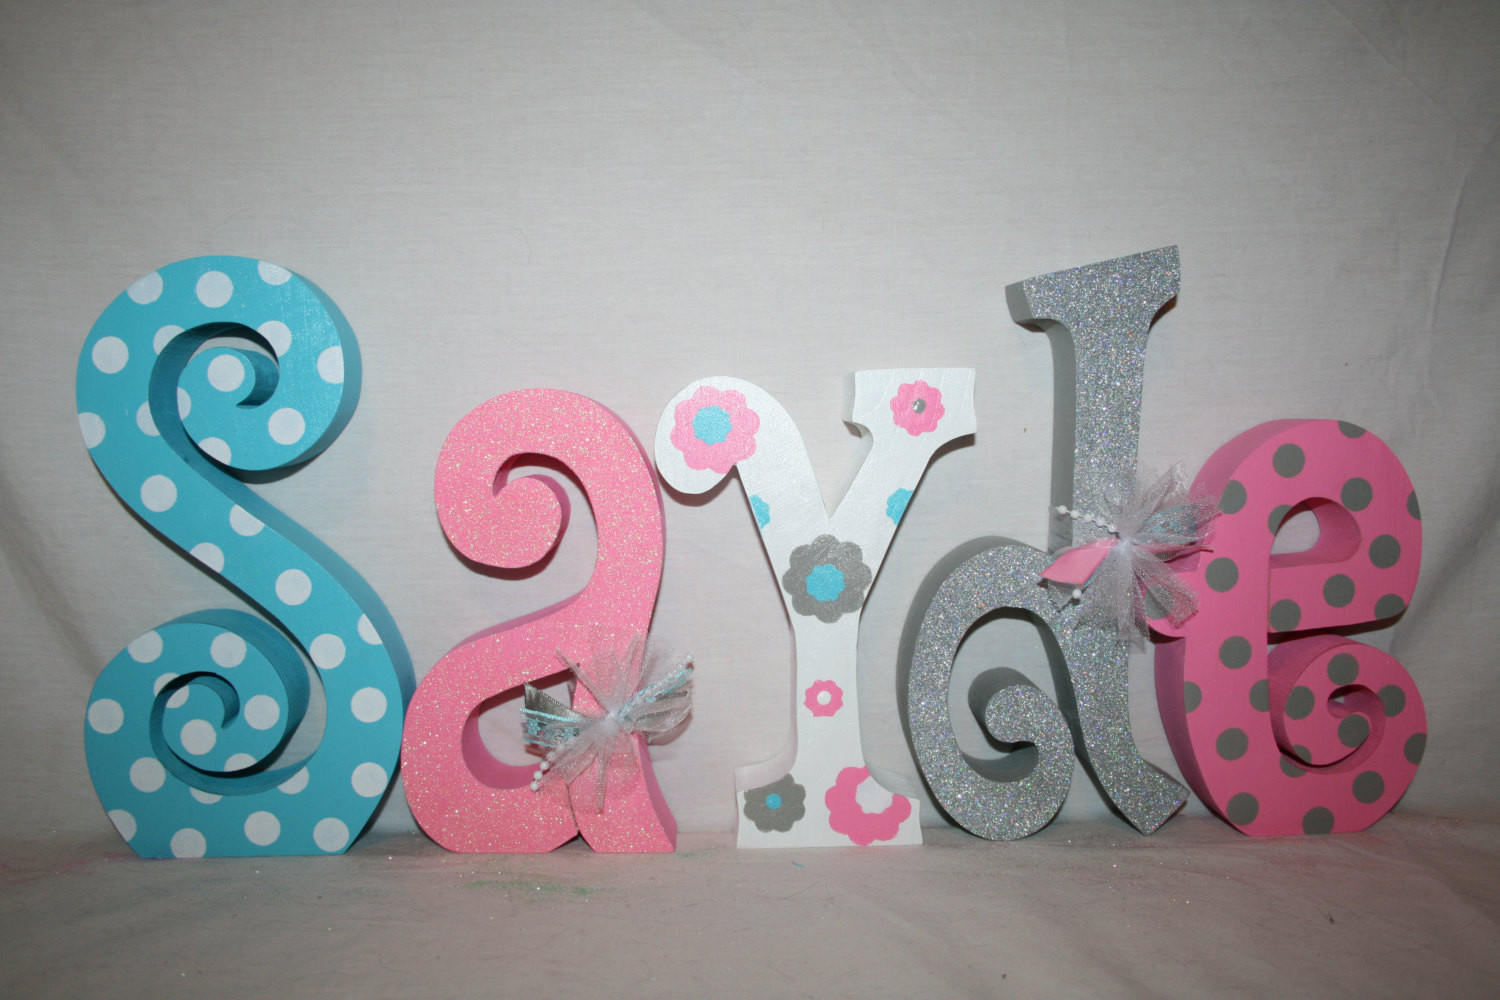 Baby Name Letters Room Decor
 Baby name letters Nursery decor Nursery letters 5 letter